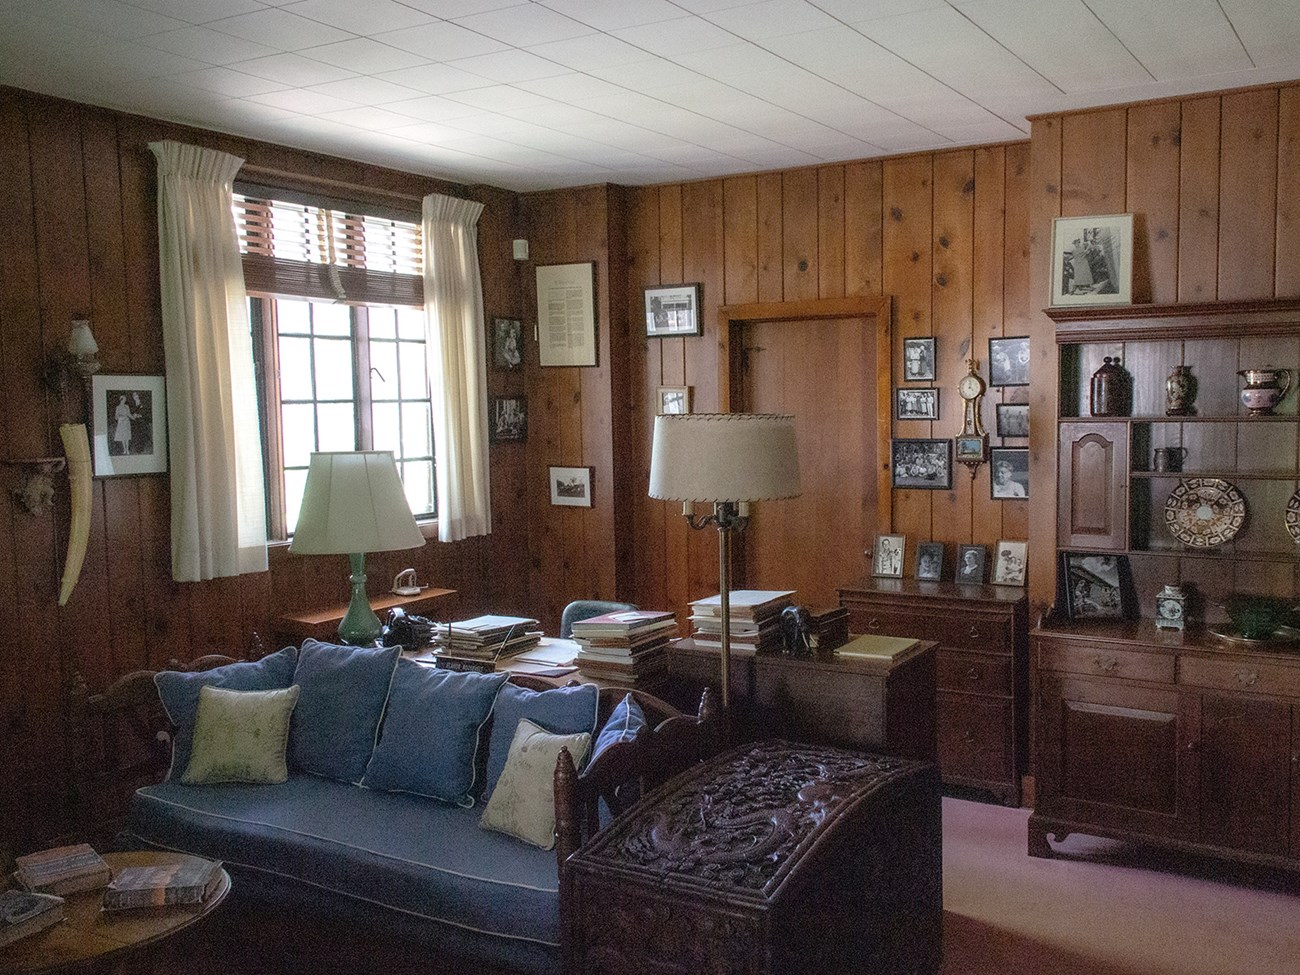 A paneled room with upholstered and many photos on the walls.